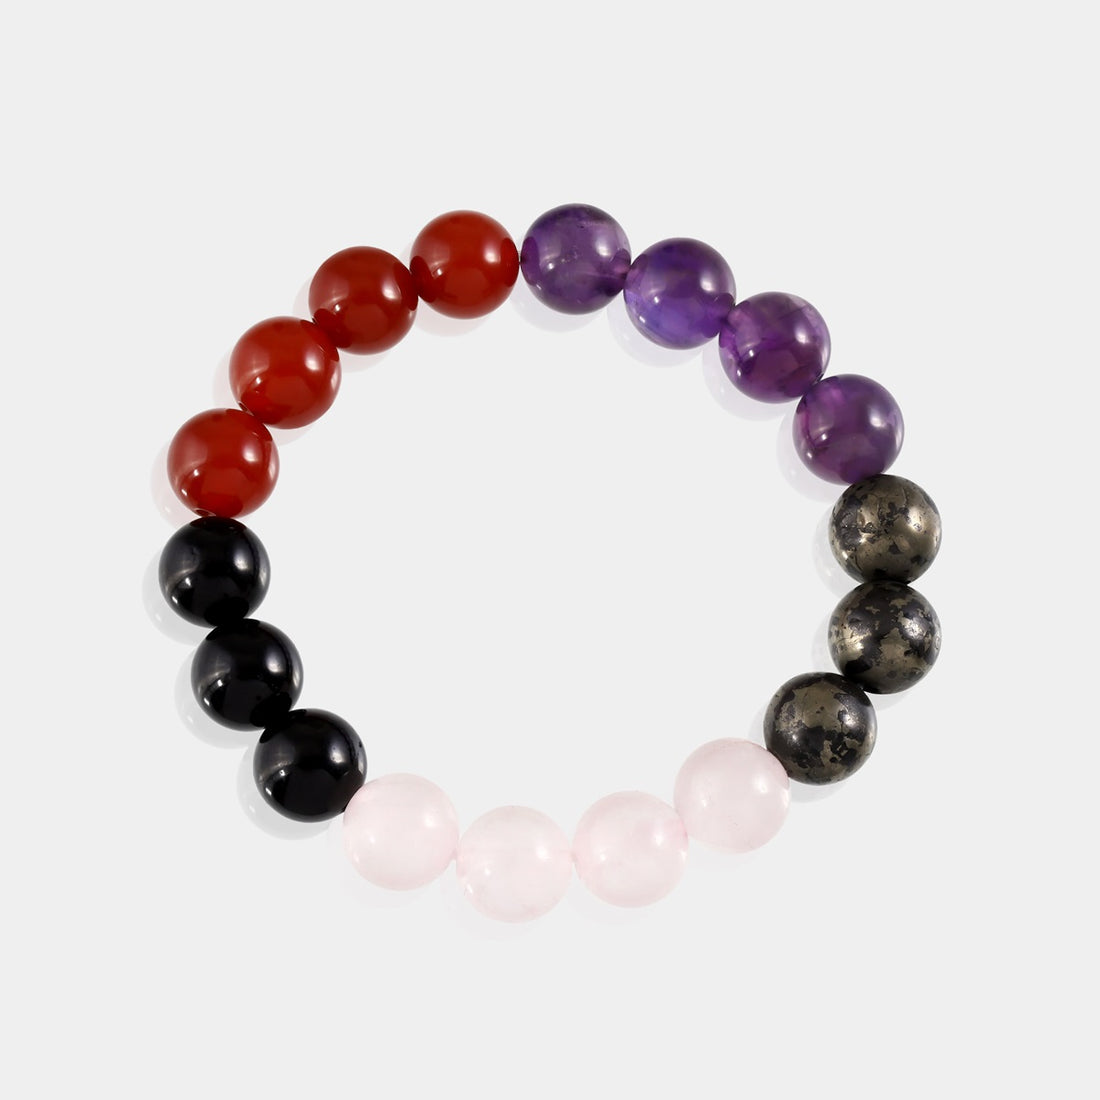 Stylish and meaningful stretch bracelet featuring Black Tourmaline, Amethyst, Rose Quartz, Carnelian, and Pyrite for protection, love, and abundance